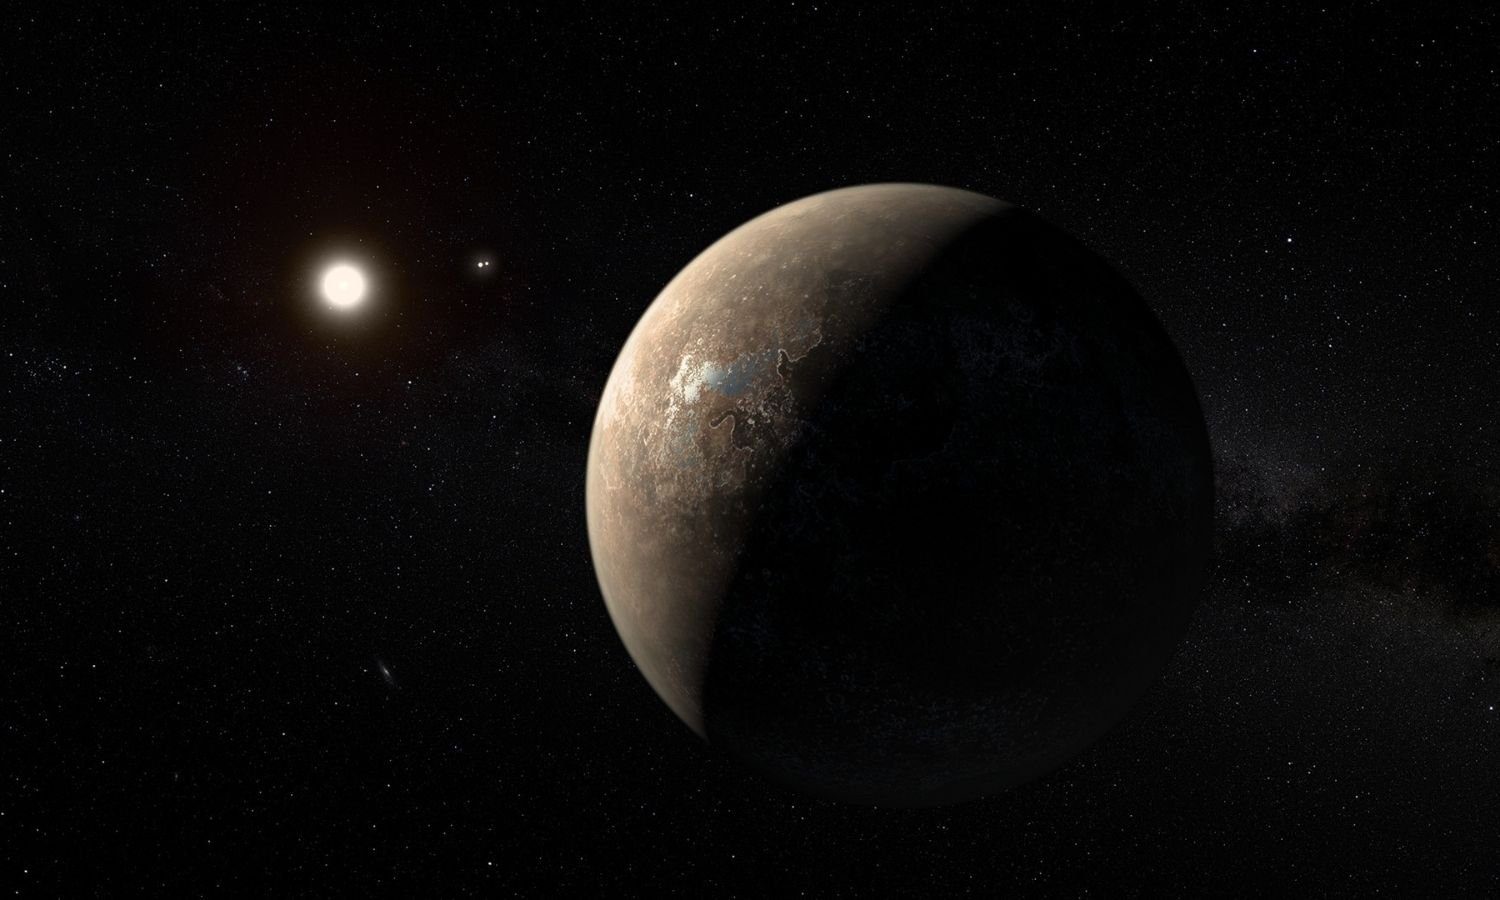 OTD in 2016: The discovery of an Earth-like planet named Proxima b was announced by astronomers.